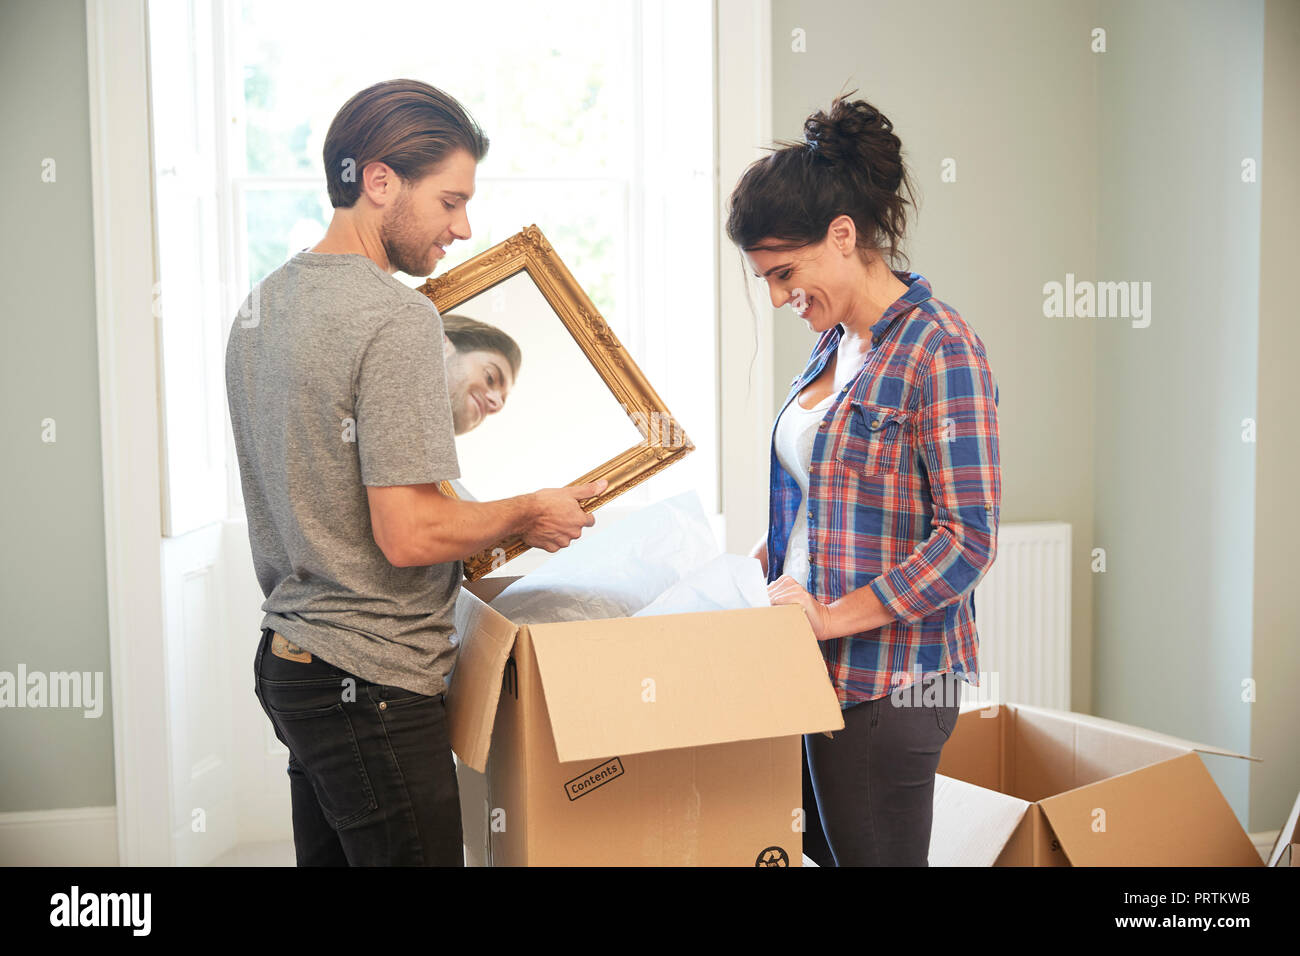 Couple packing mirror into cardboard box Stock Photo